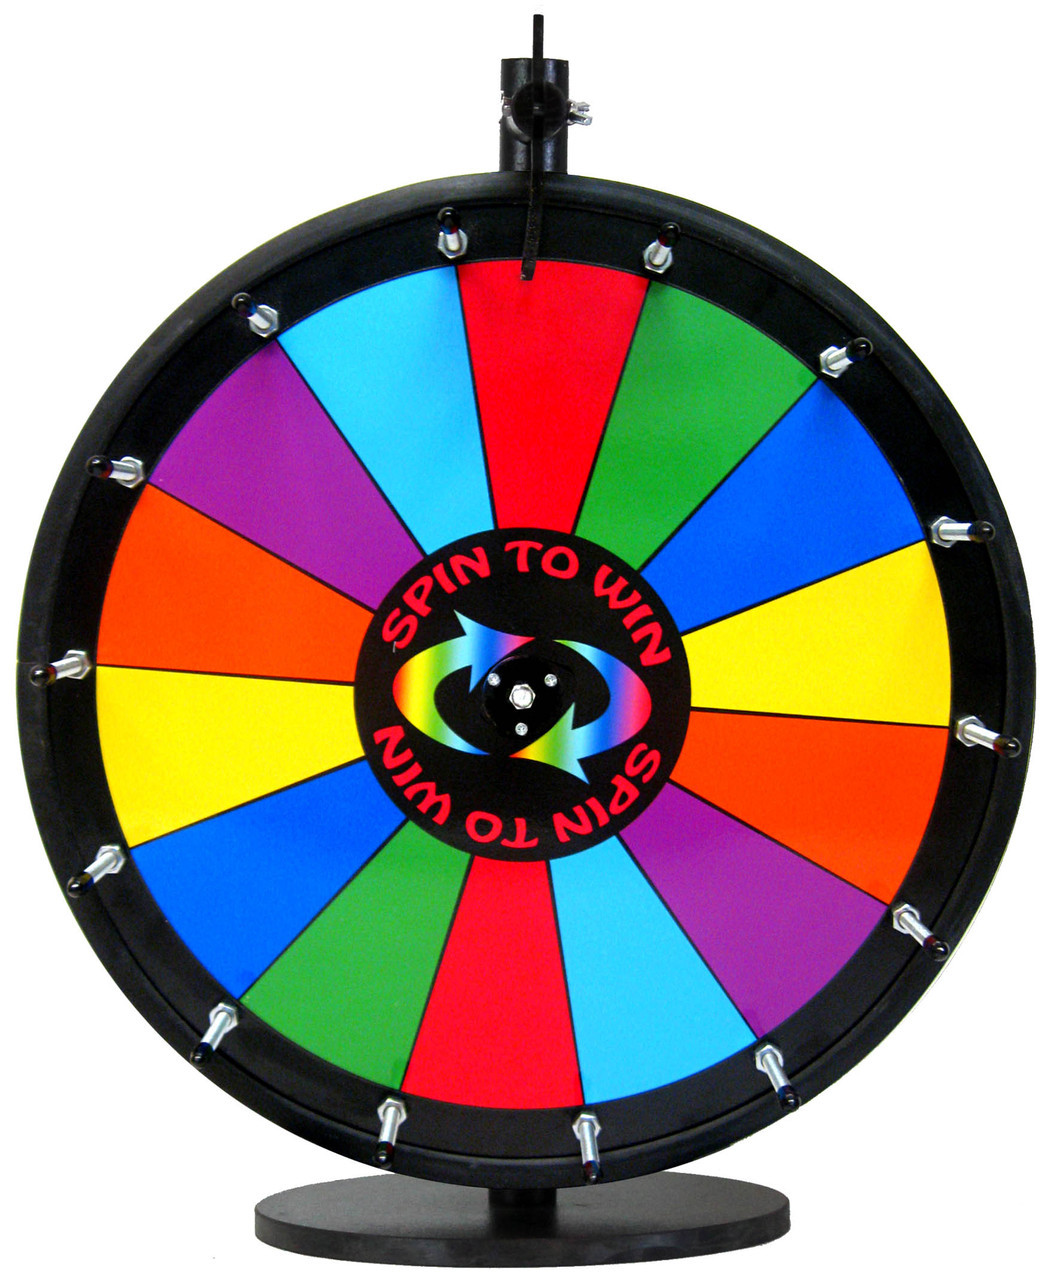 18" Yellow and White Promotional Dry Erase Trade Show Prize Wheel 